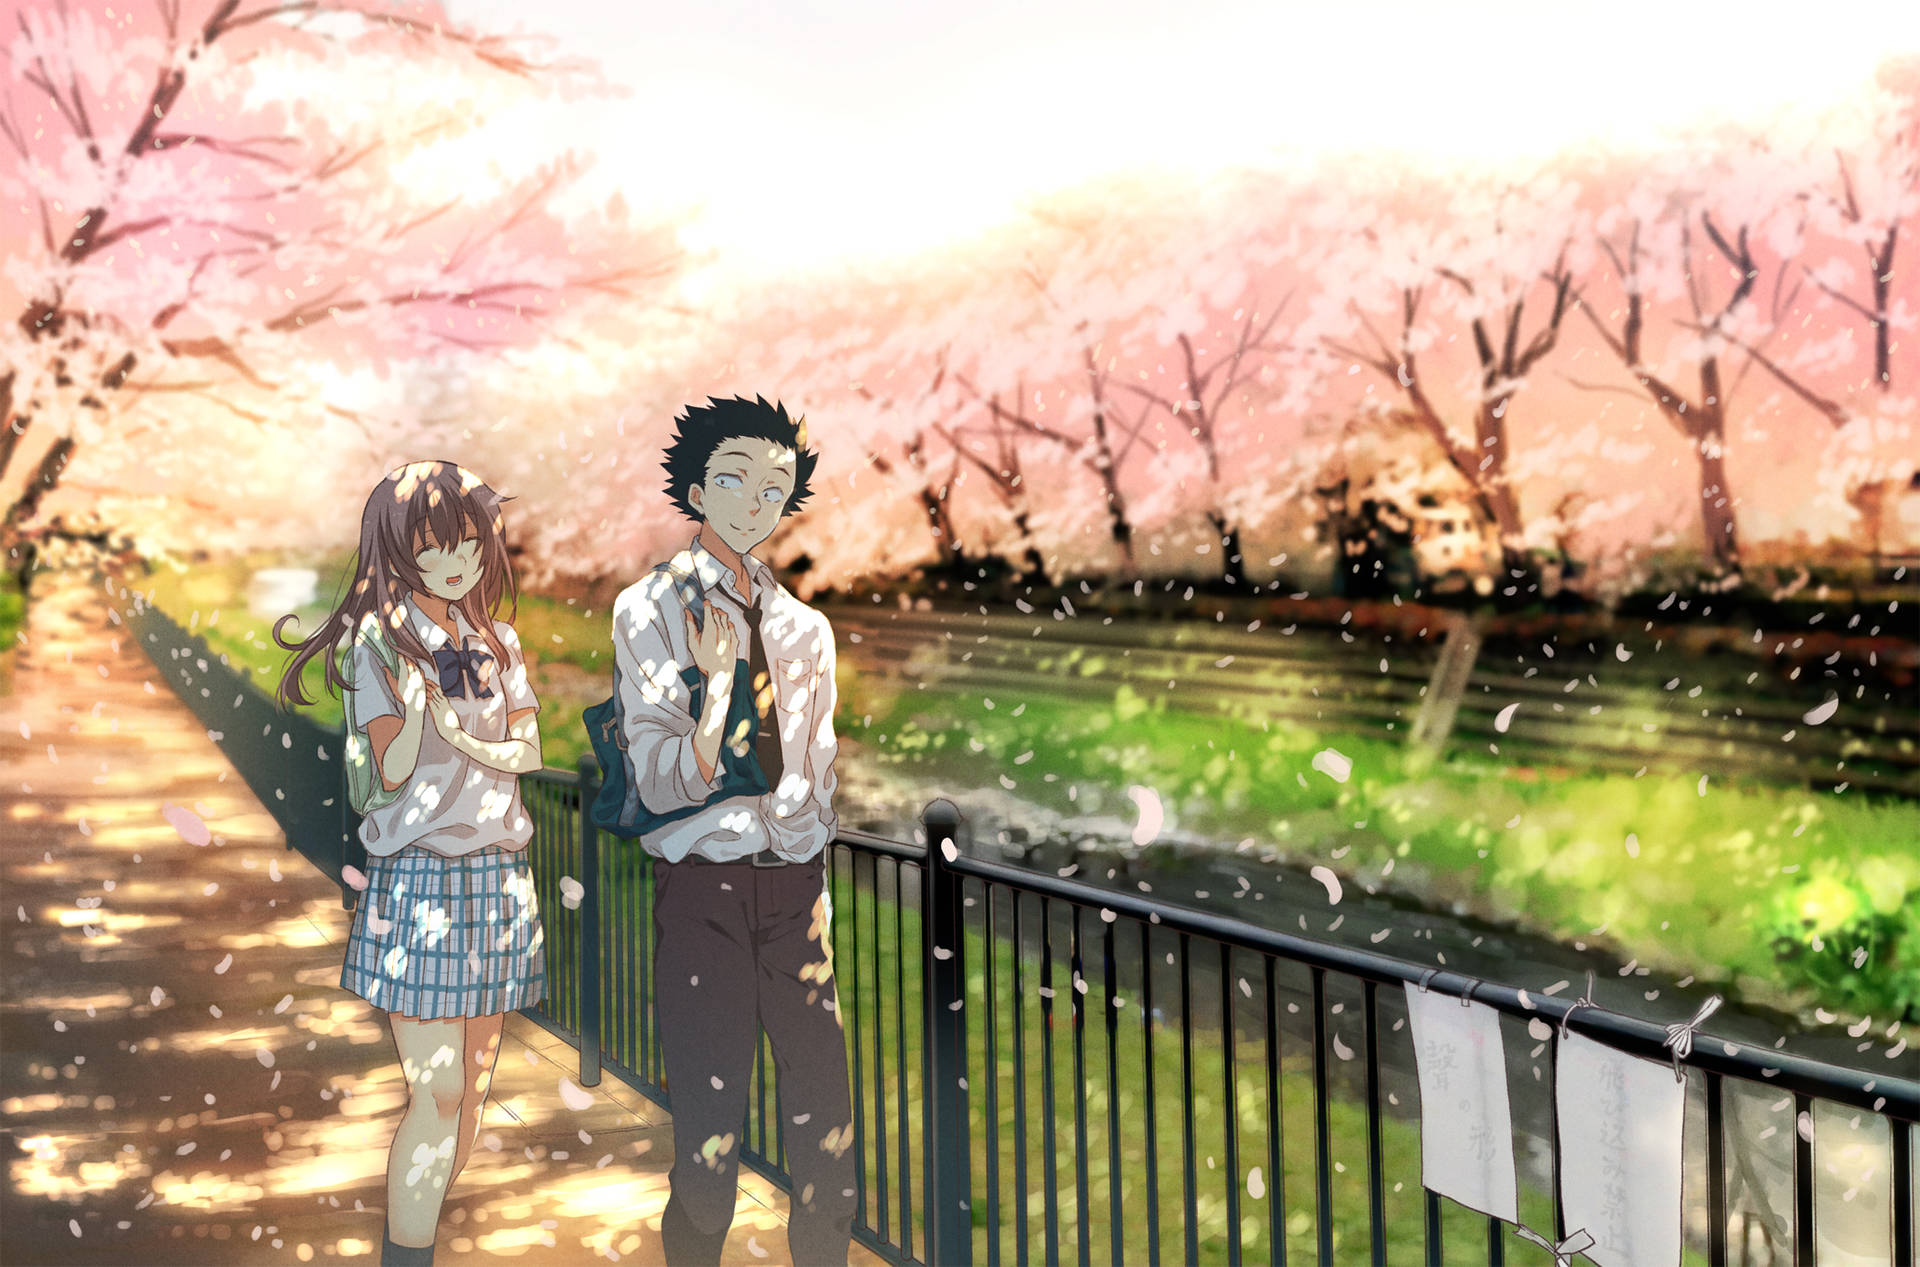 A Silent Voice - A young couple out for a walk beside a creek Wallpaper